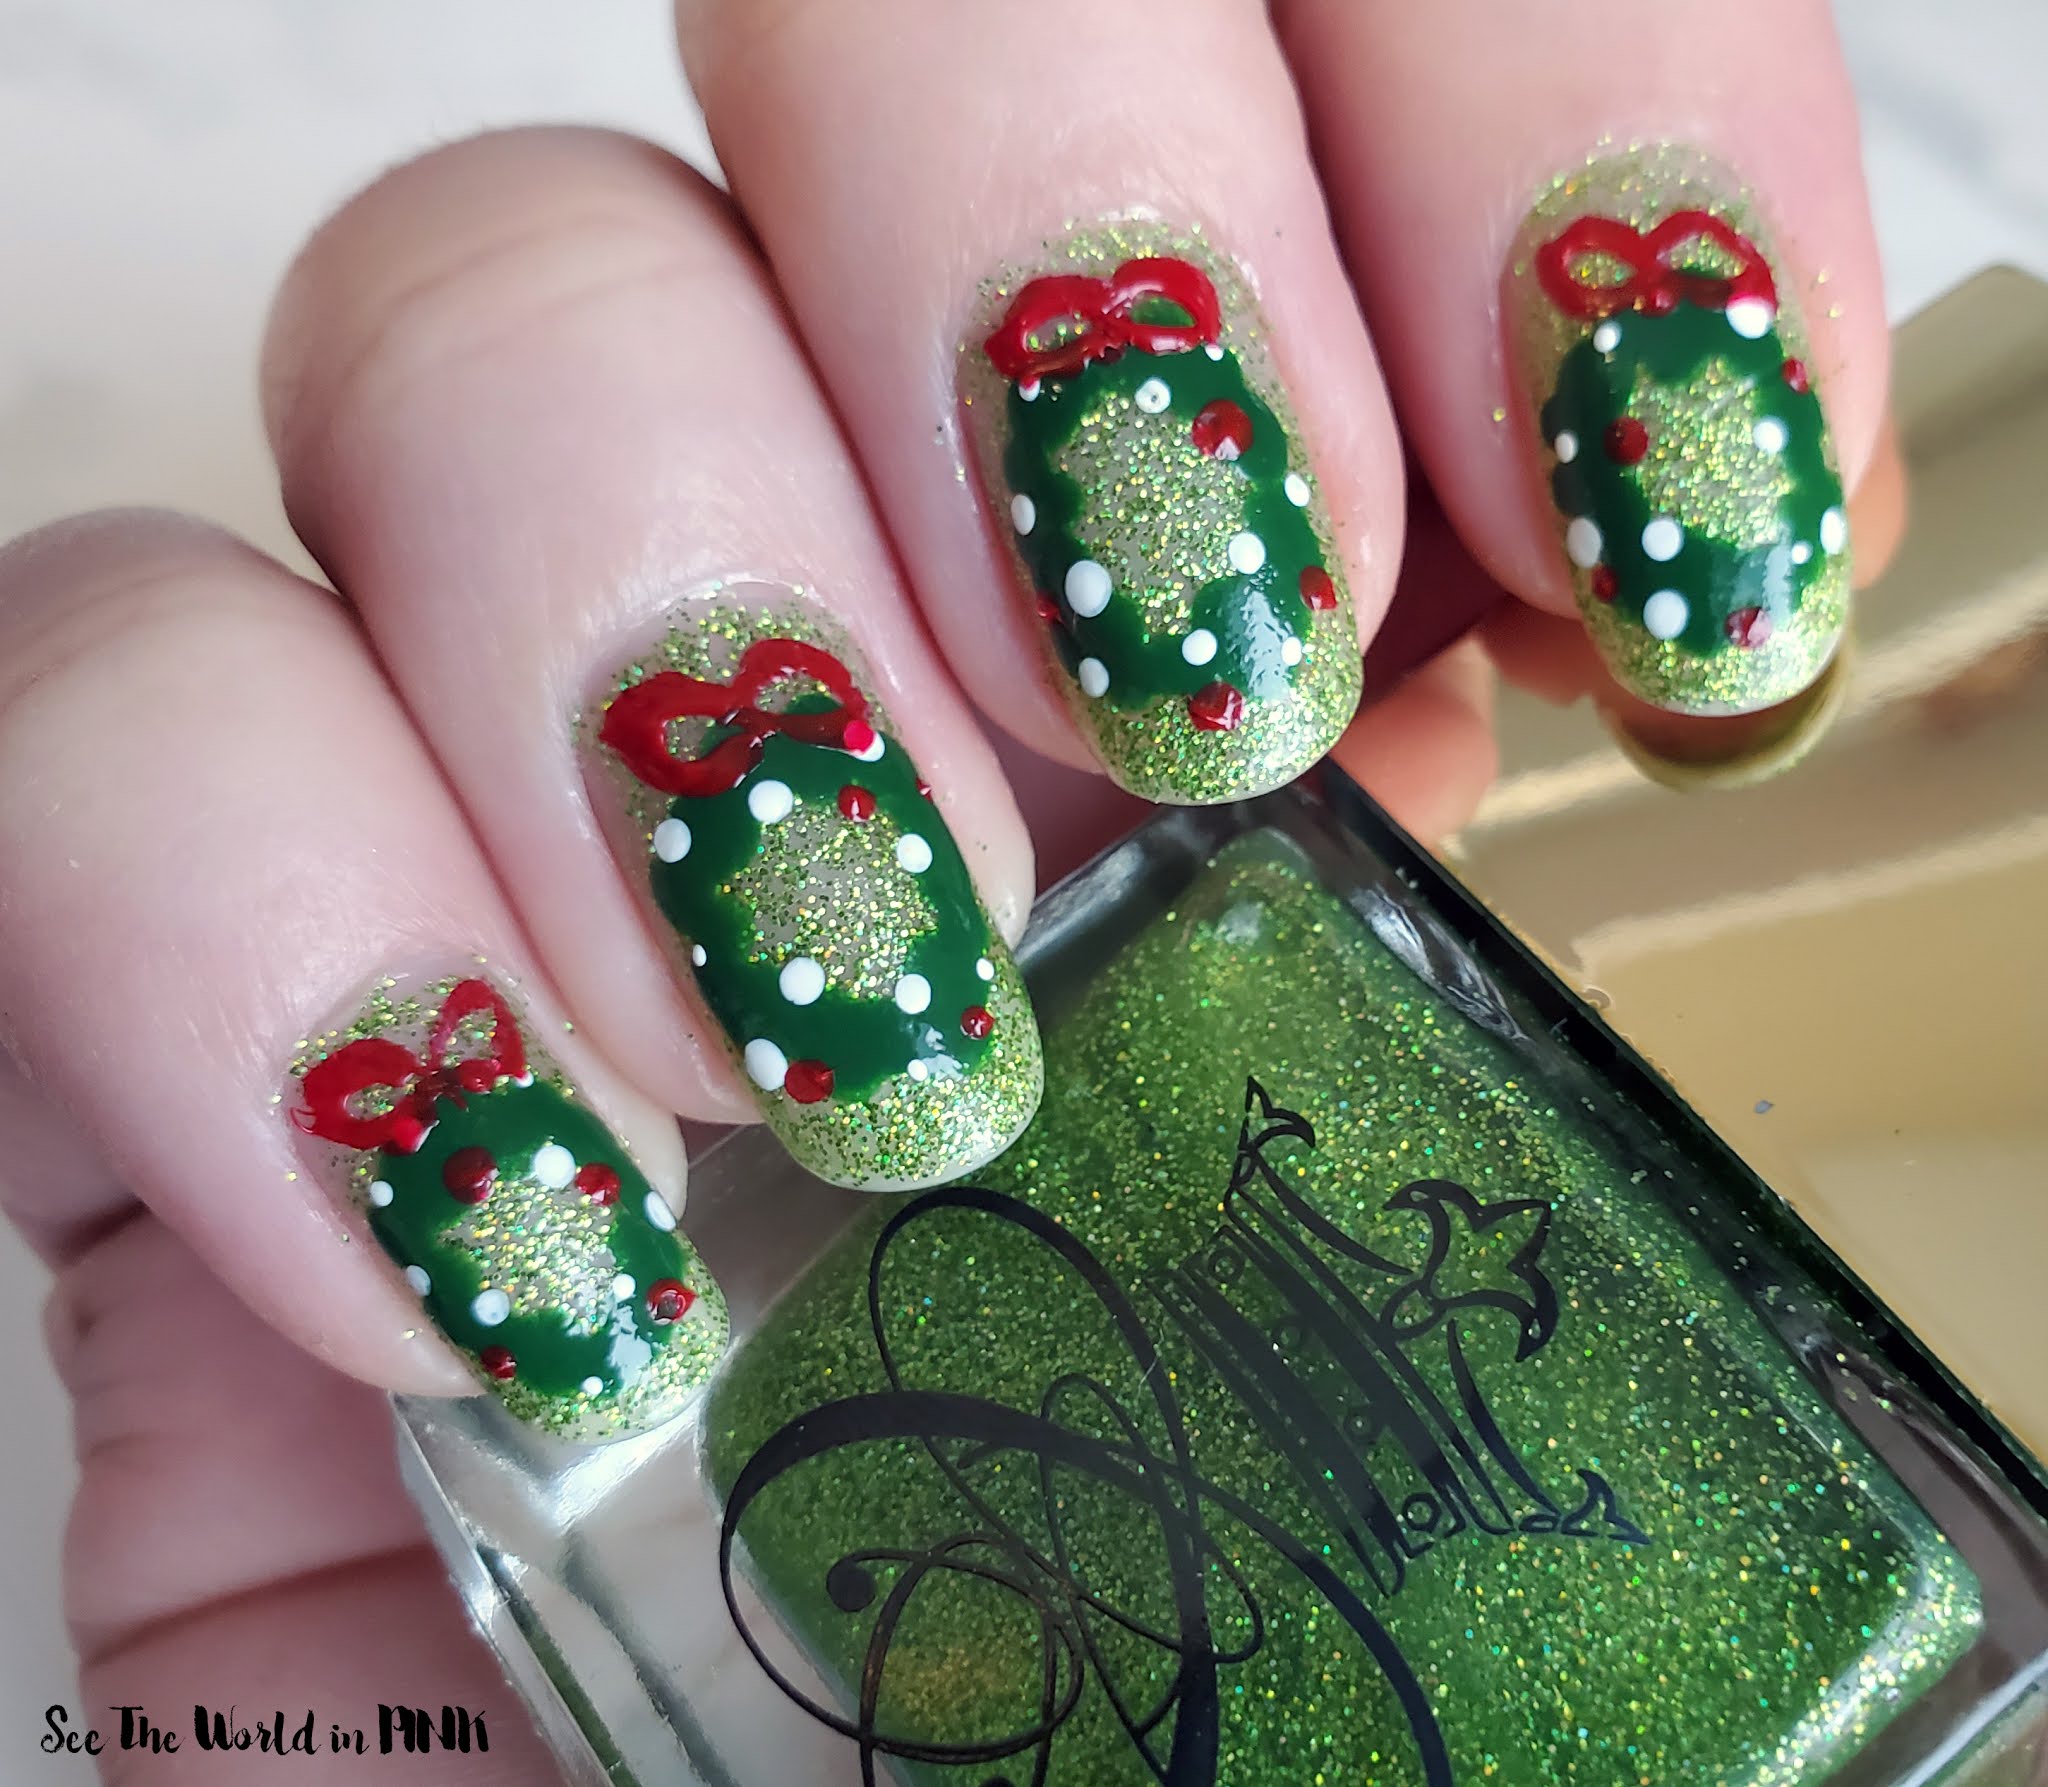 Manicure Monday - Christmas Wreath Nails | See the World in PINK